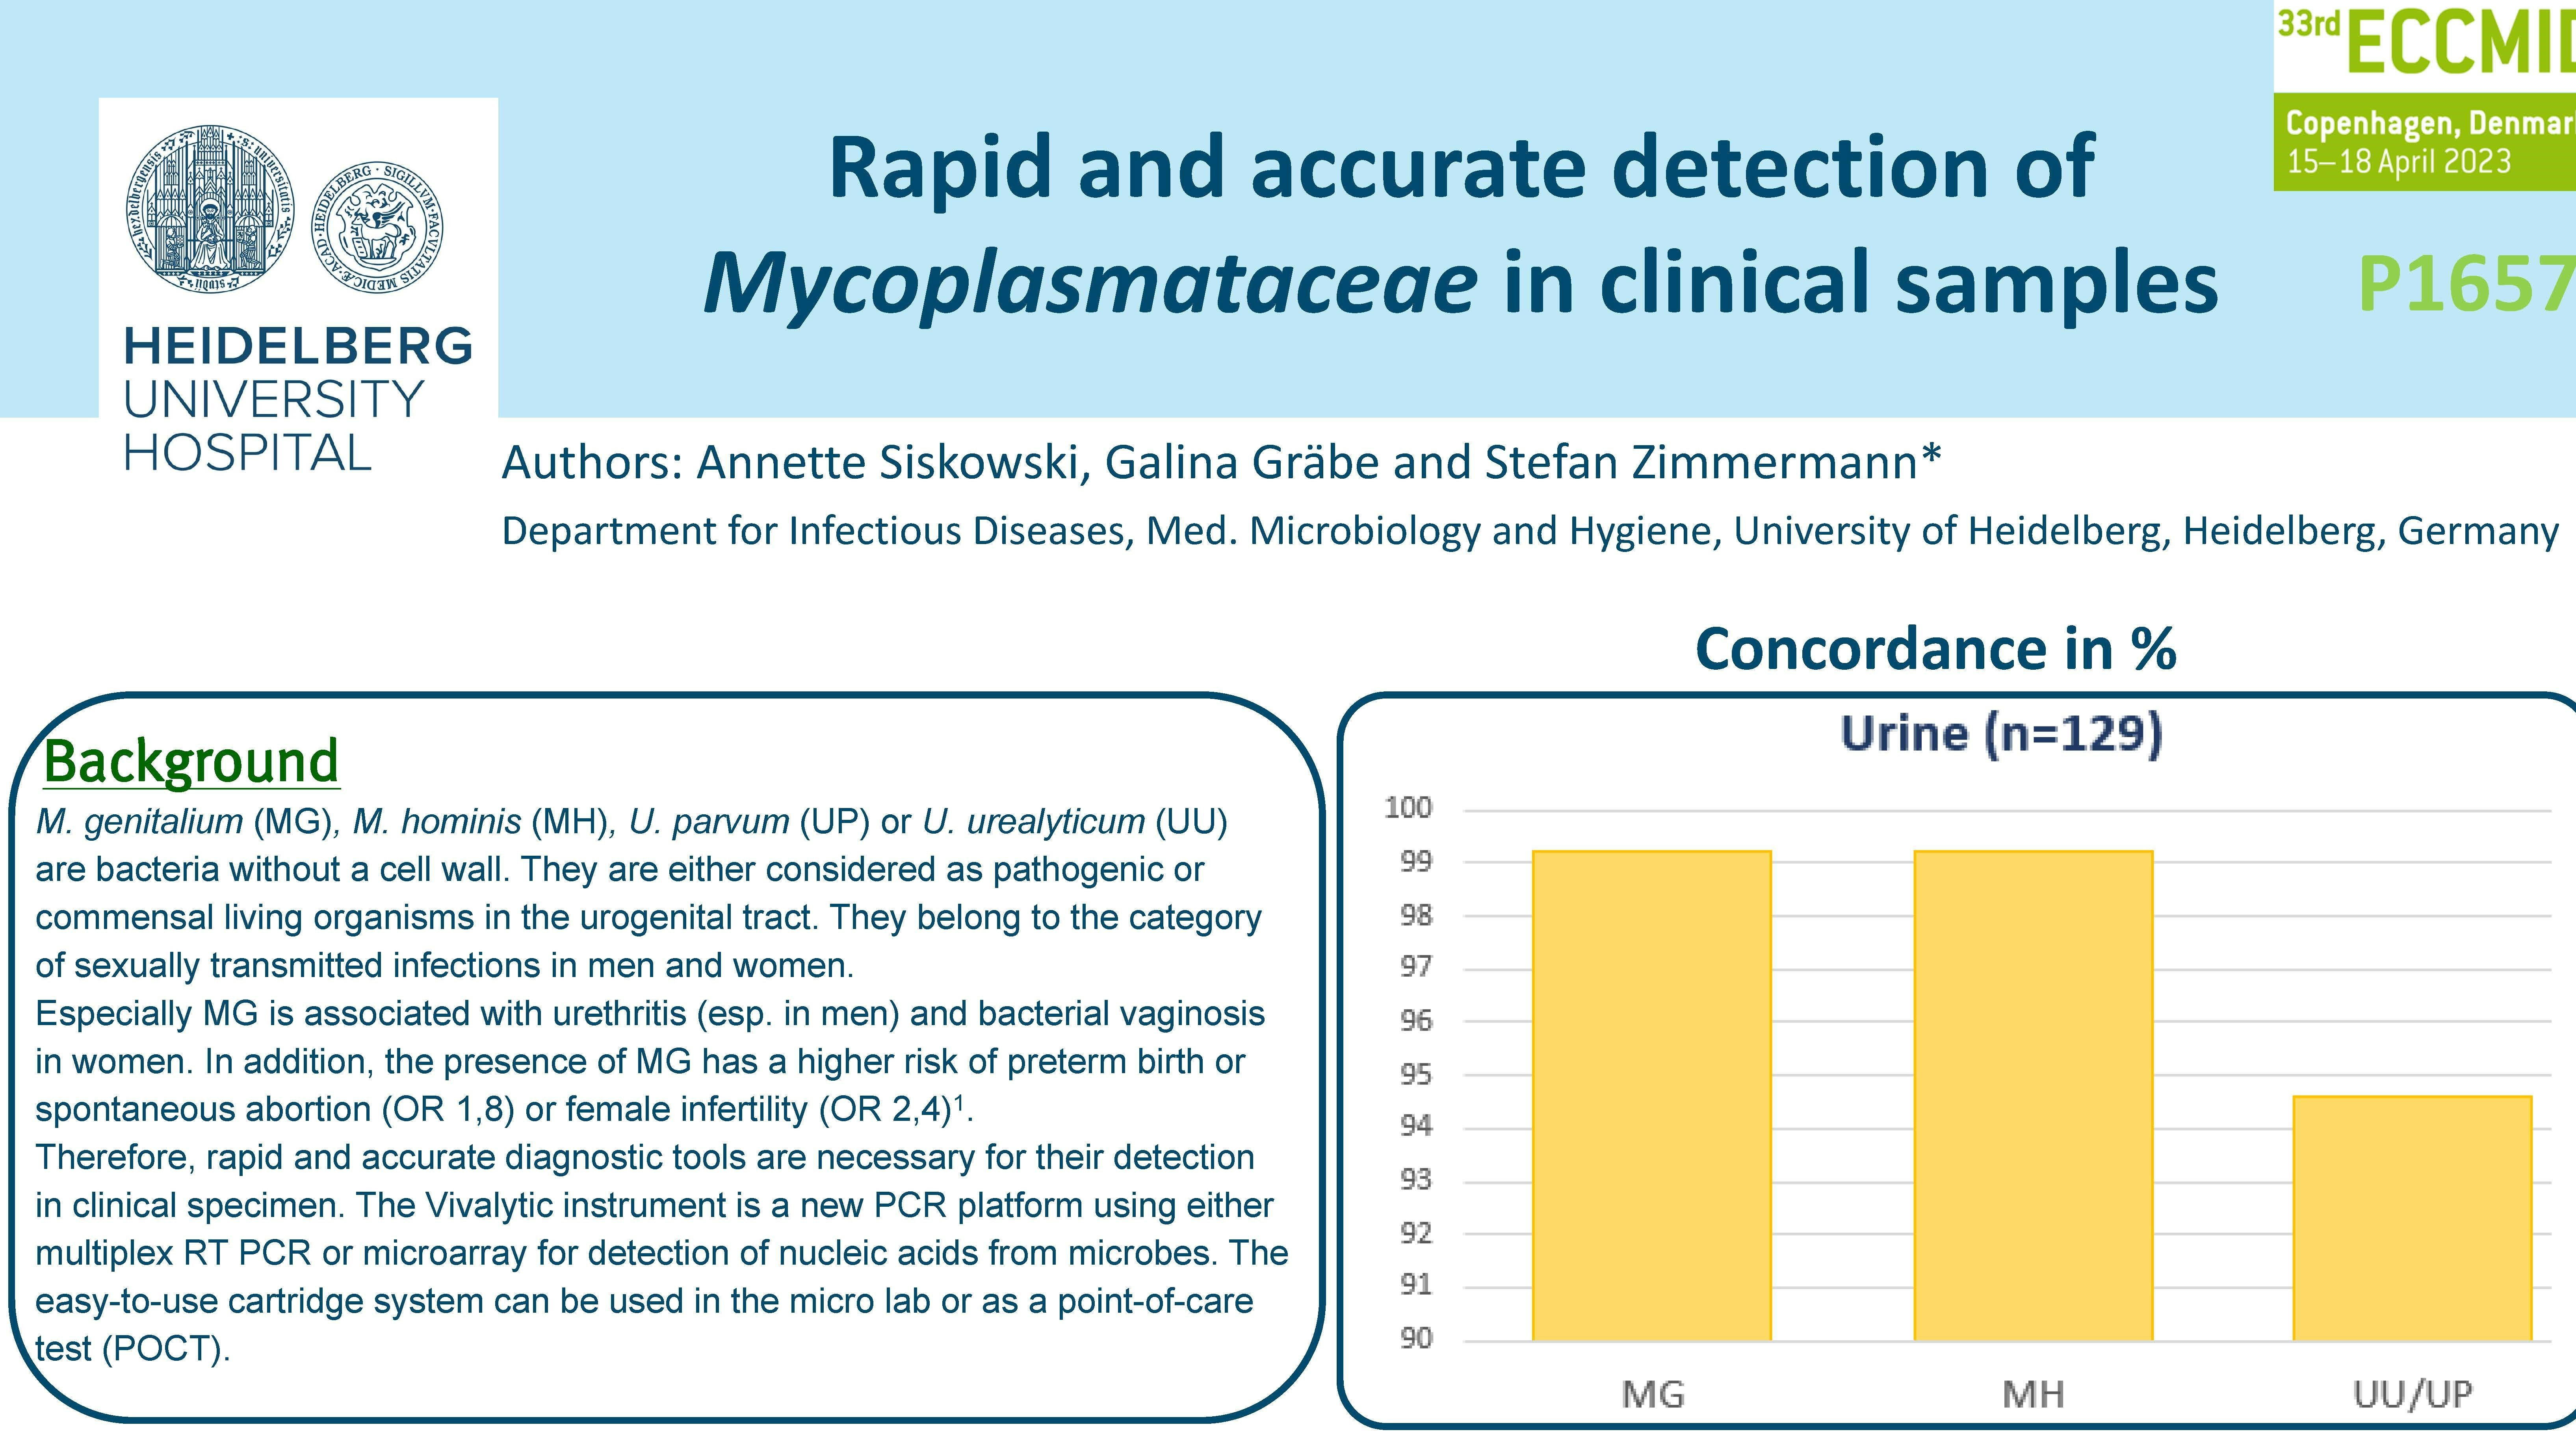 Eccmid 2023 poster on "Rapid and accurate detection of Mycoplasmataceae